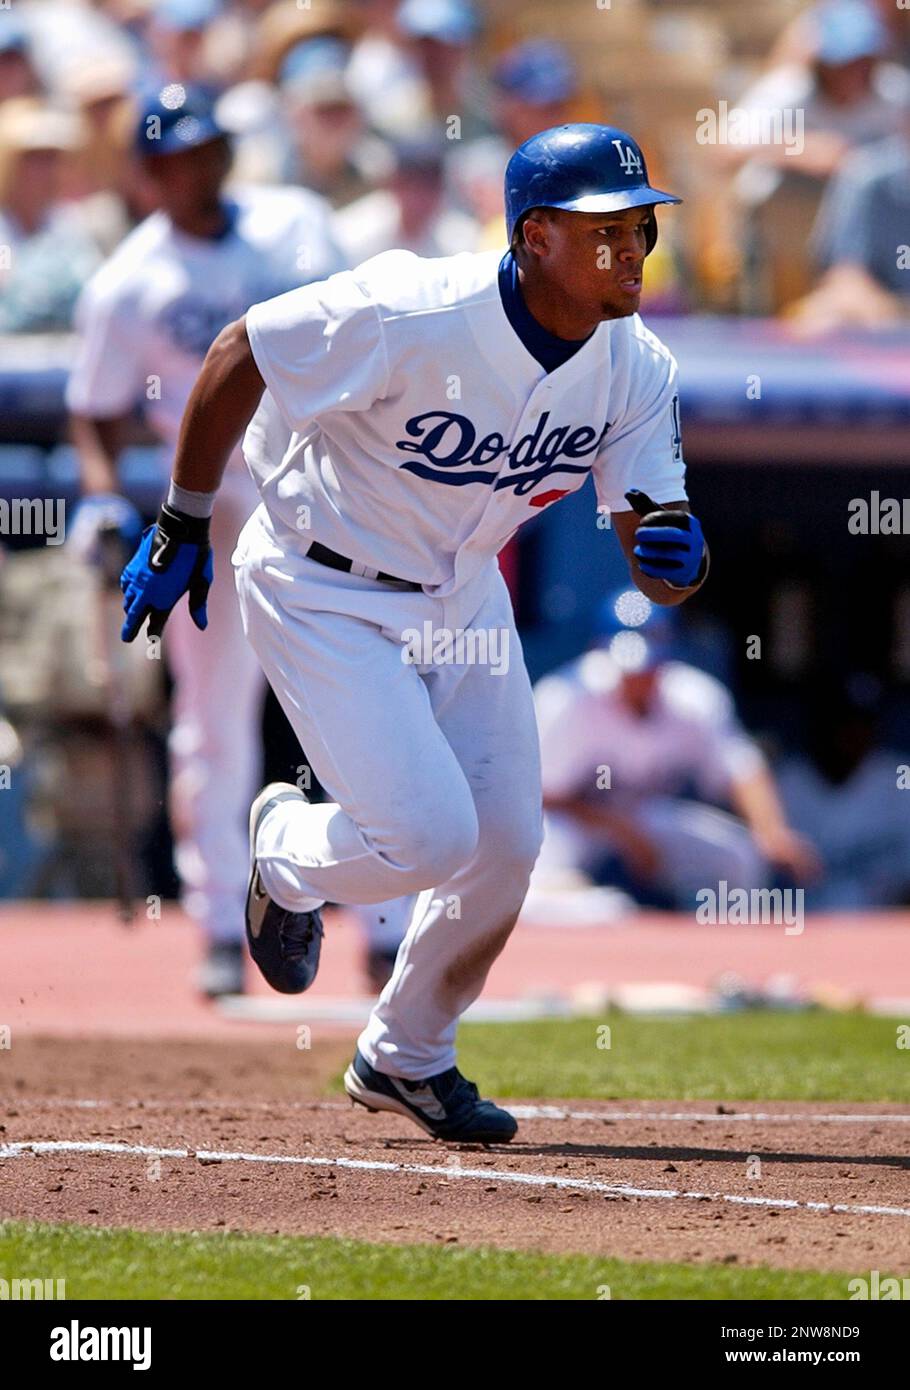 25 Apr. 2004: Los Angeles Dodgers third baseman Adrian Beltre (29) heads  towards first base during an at bat in a game against the San Francisco  Giants played on April 25, 2004